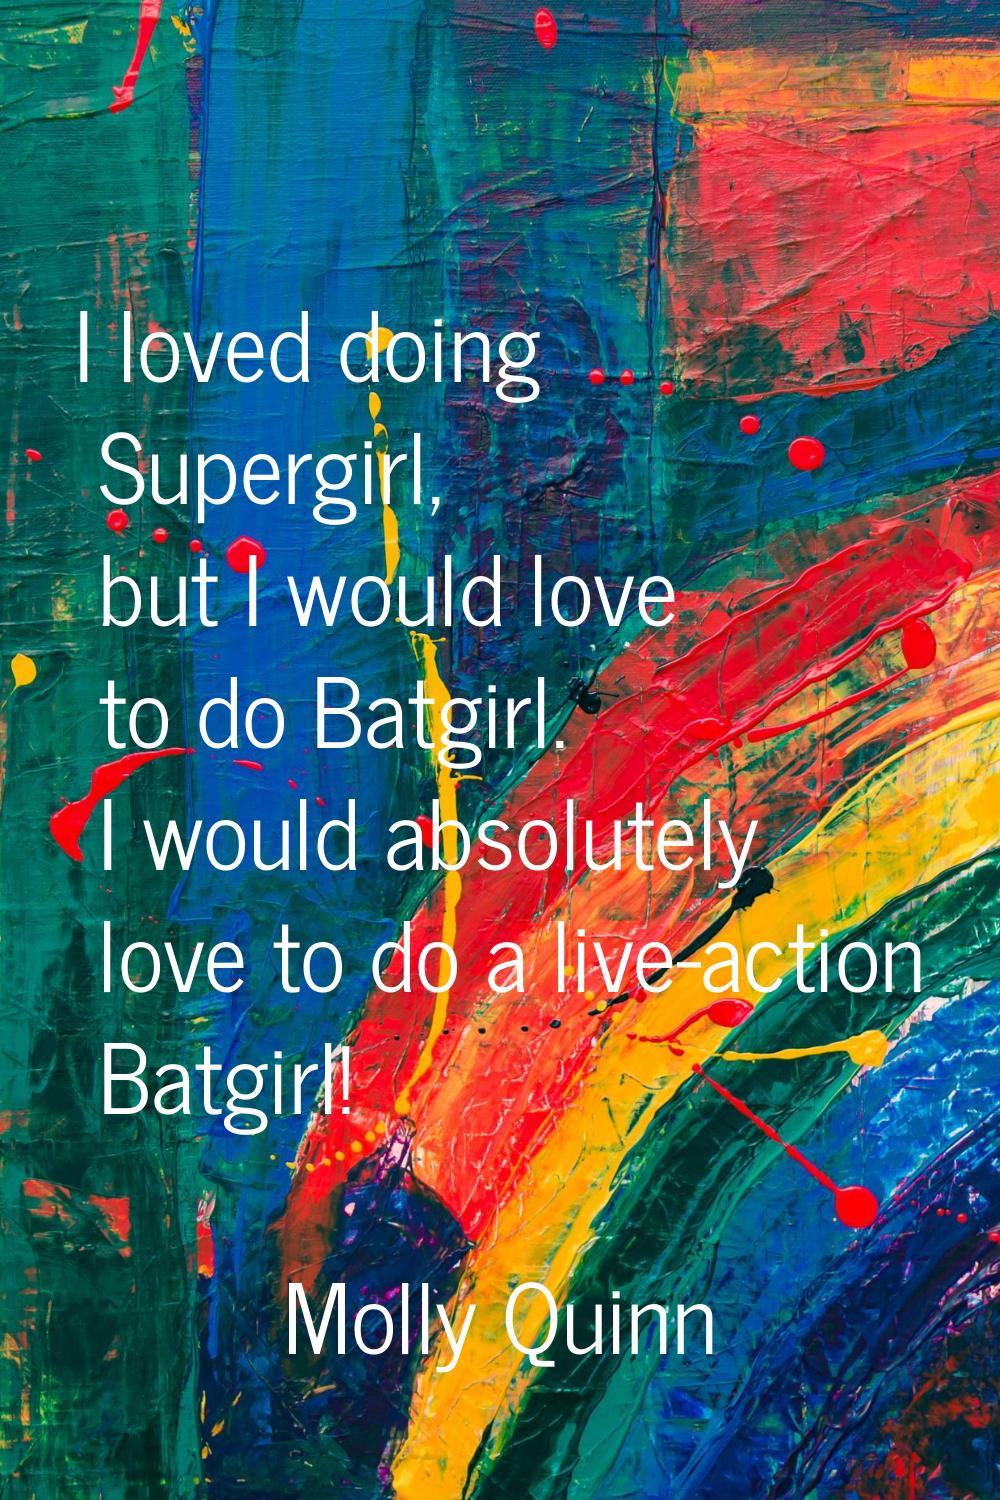 I loved doing Supergirl, but I would love to do Batgirl. I would absolutely love to do a live-actio